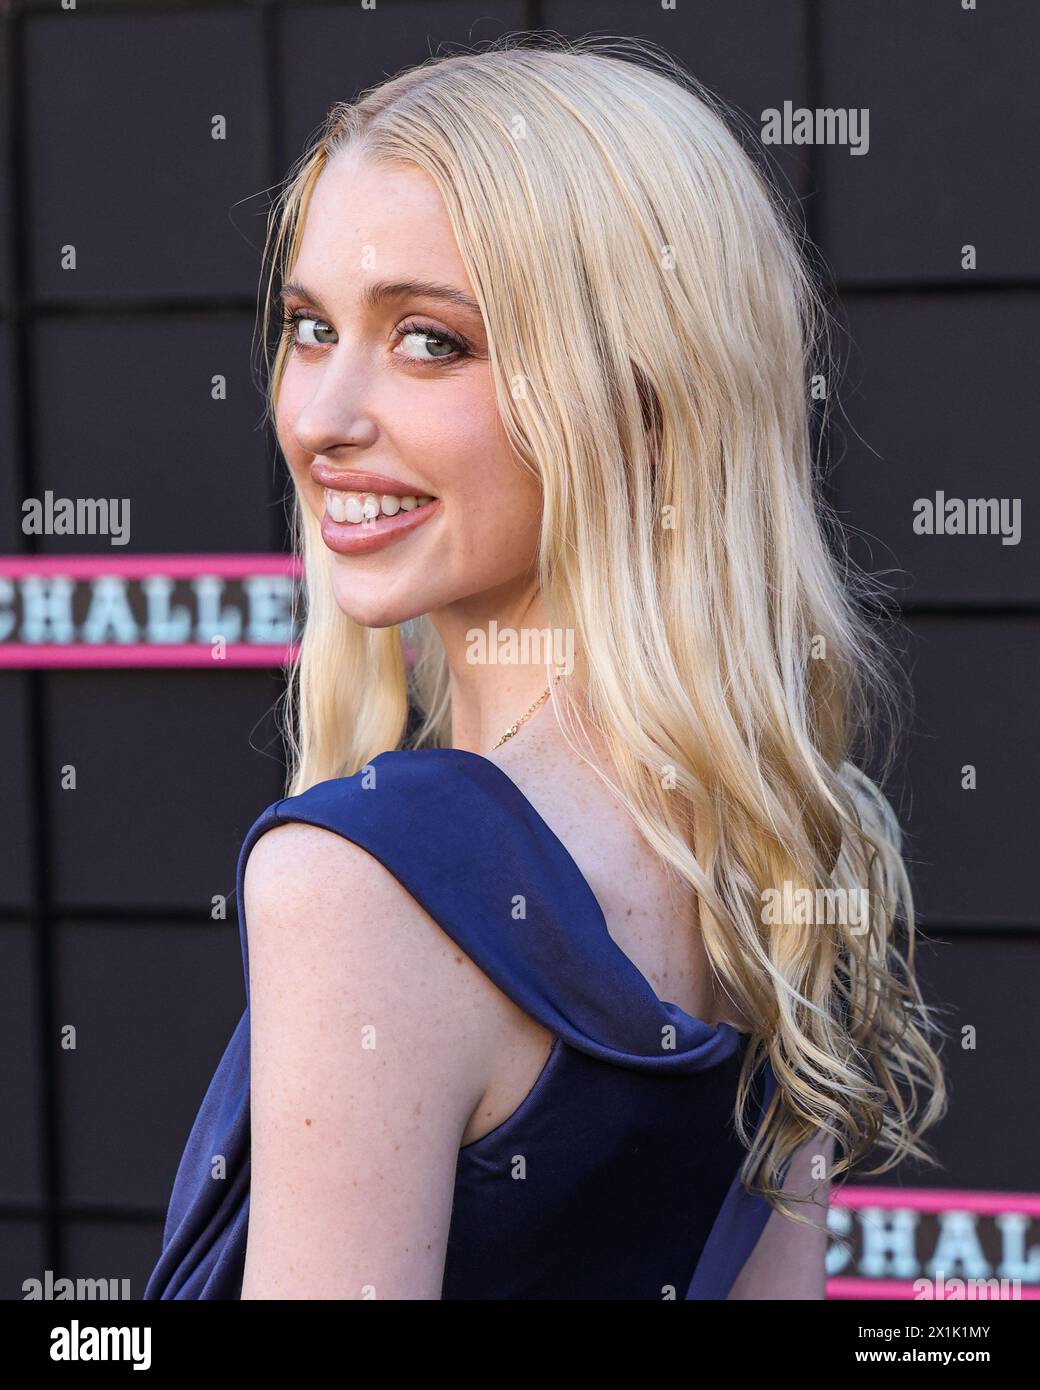 WESTWOOD, LOS ANGELES, CALIFORNIA, USA - APRIL 16: Chloe Cherry arrives at the Los Angeles Premiere Of Amazon MGM Studios' 'Challengers' held at Westwood Village Theater on April 16, 2024 in Westwood, Los Angeles, California, United States. (Photo by Xavier Collin/Image Press Agency) Stock Photo